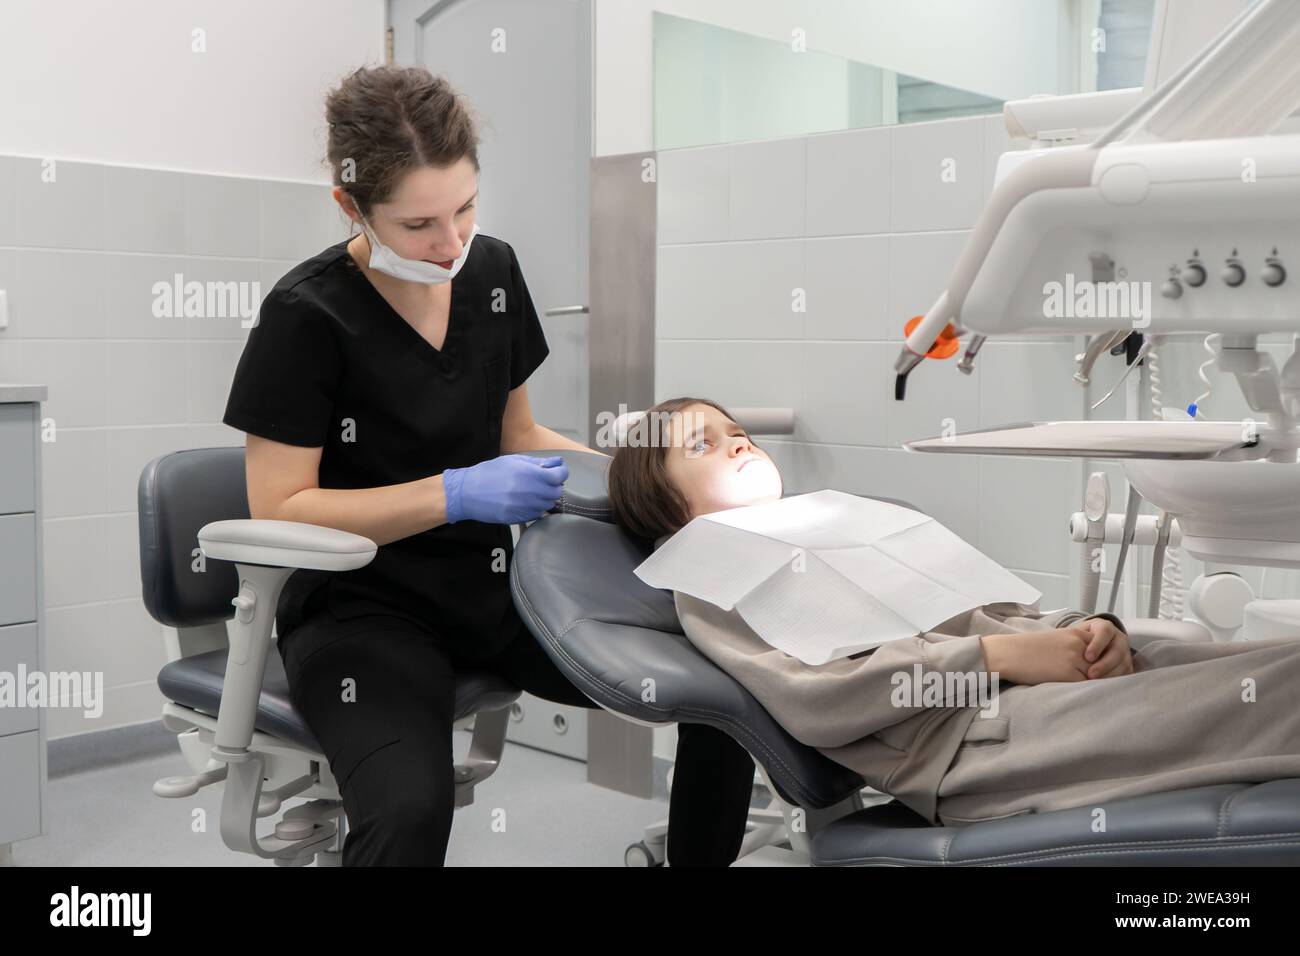 A boy sitting in a dental chair looks at a female doctor in fright. The first preventive medical examination of a child at a pediatric dentist. Stock Photo